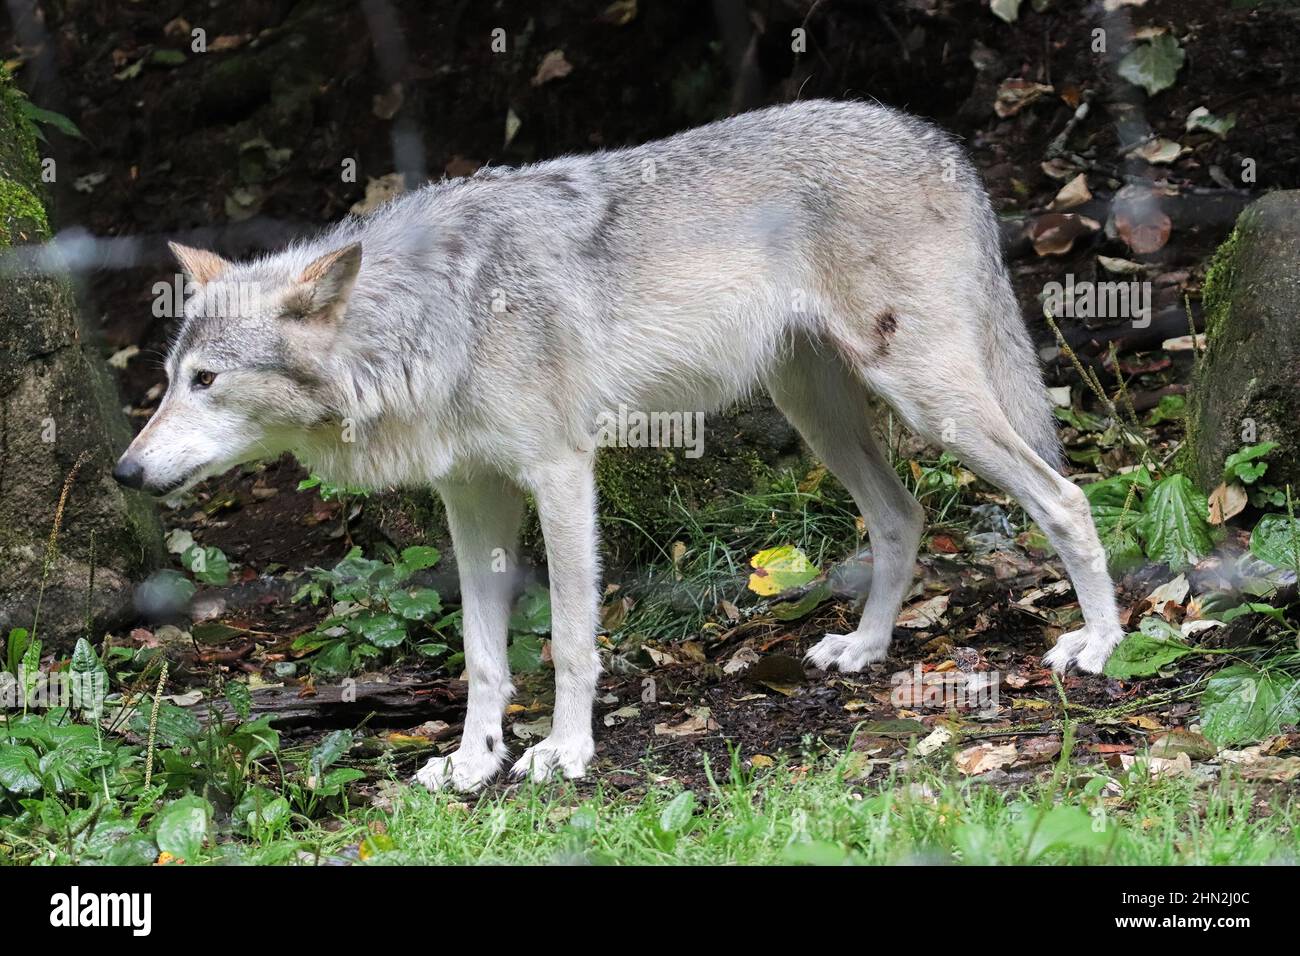 Closeup of a wolf with a wound on its leg Stock Photo